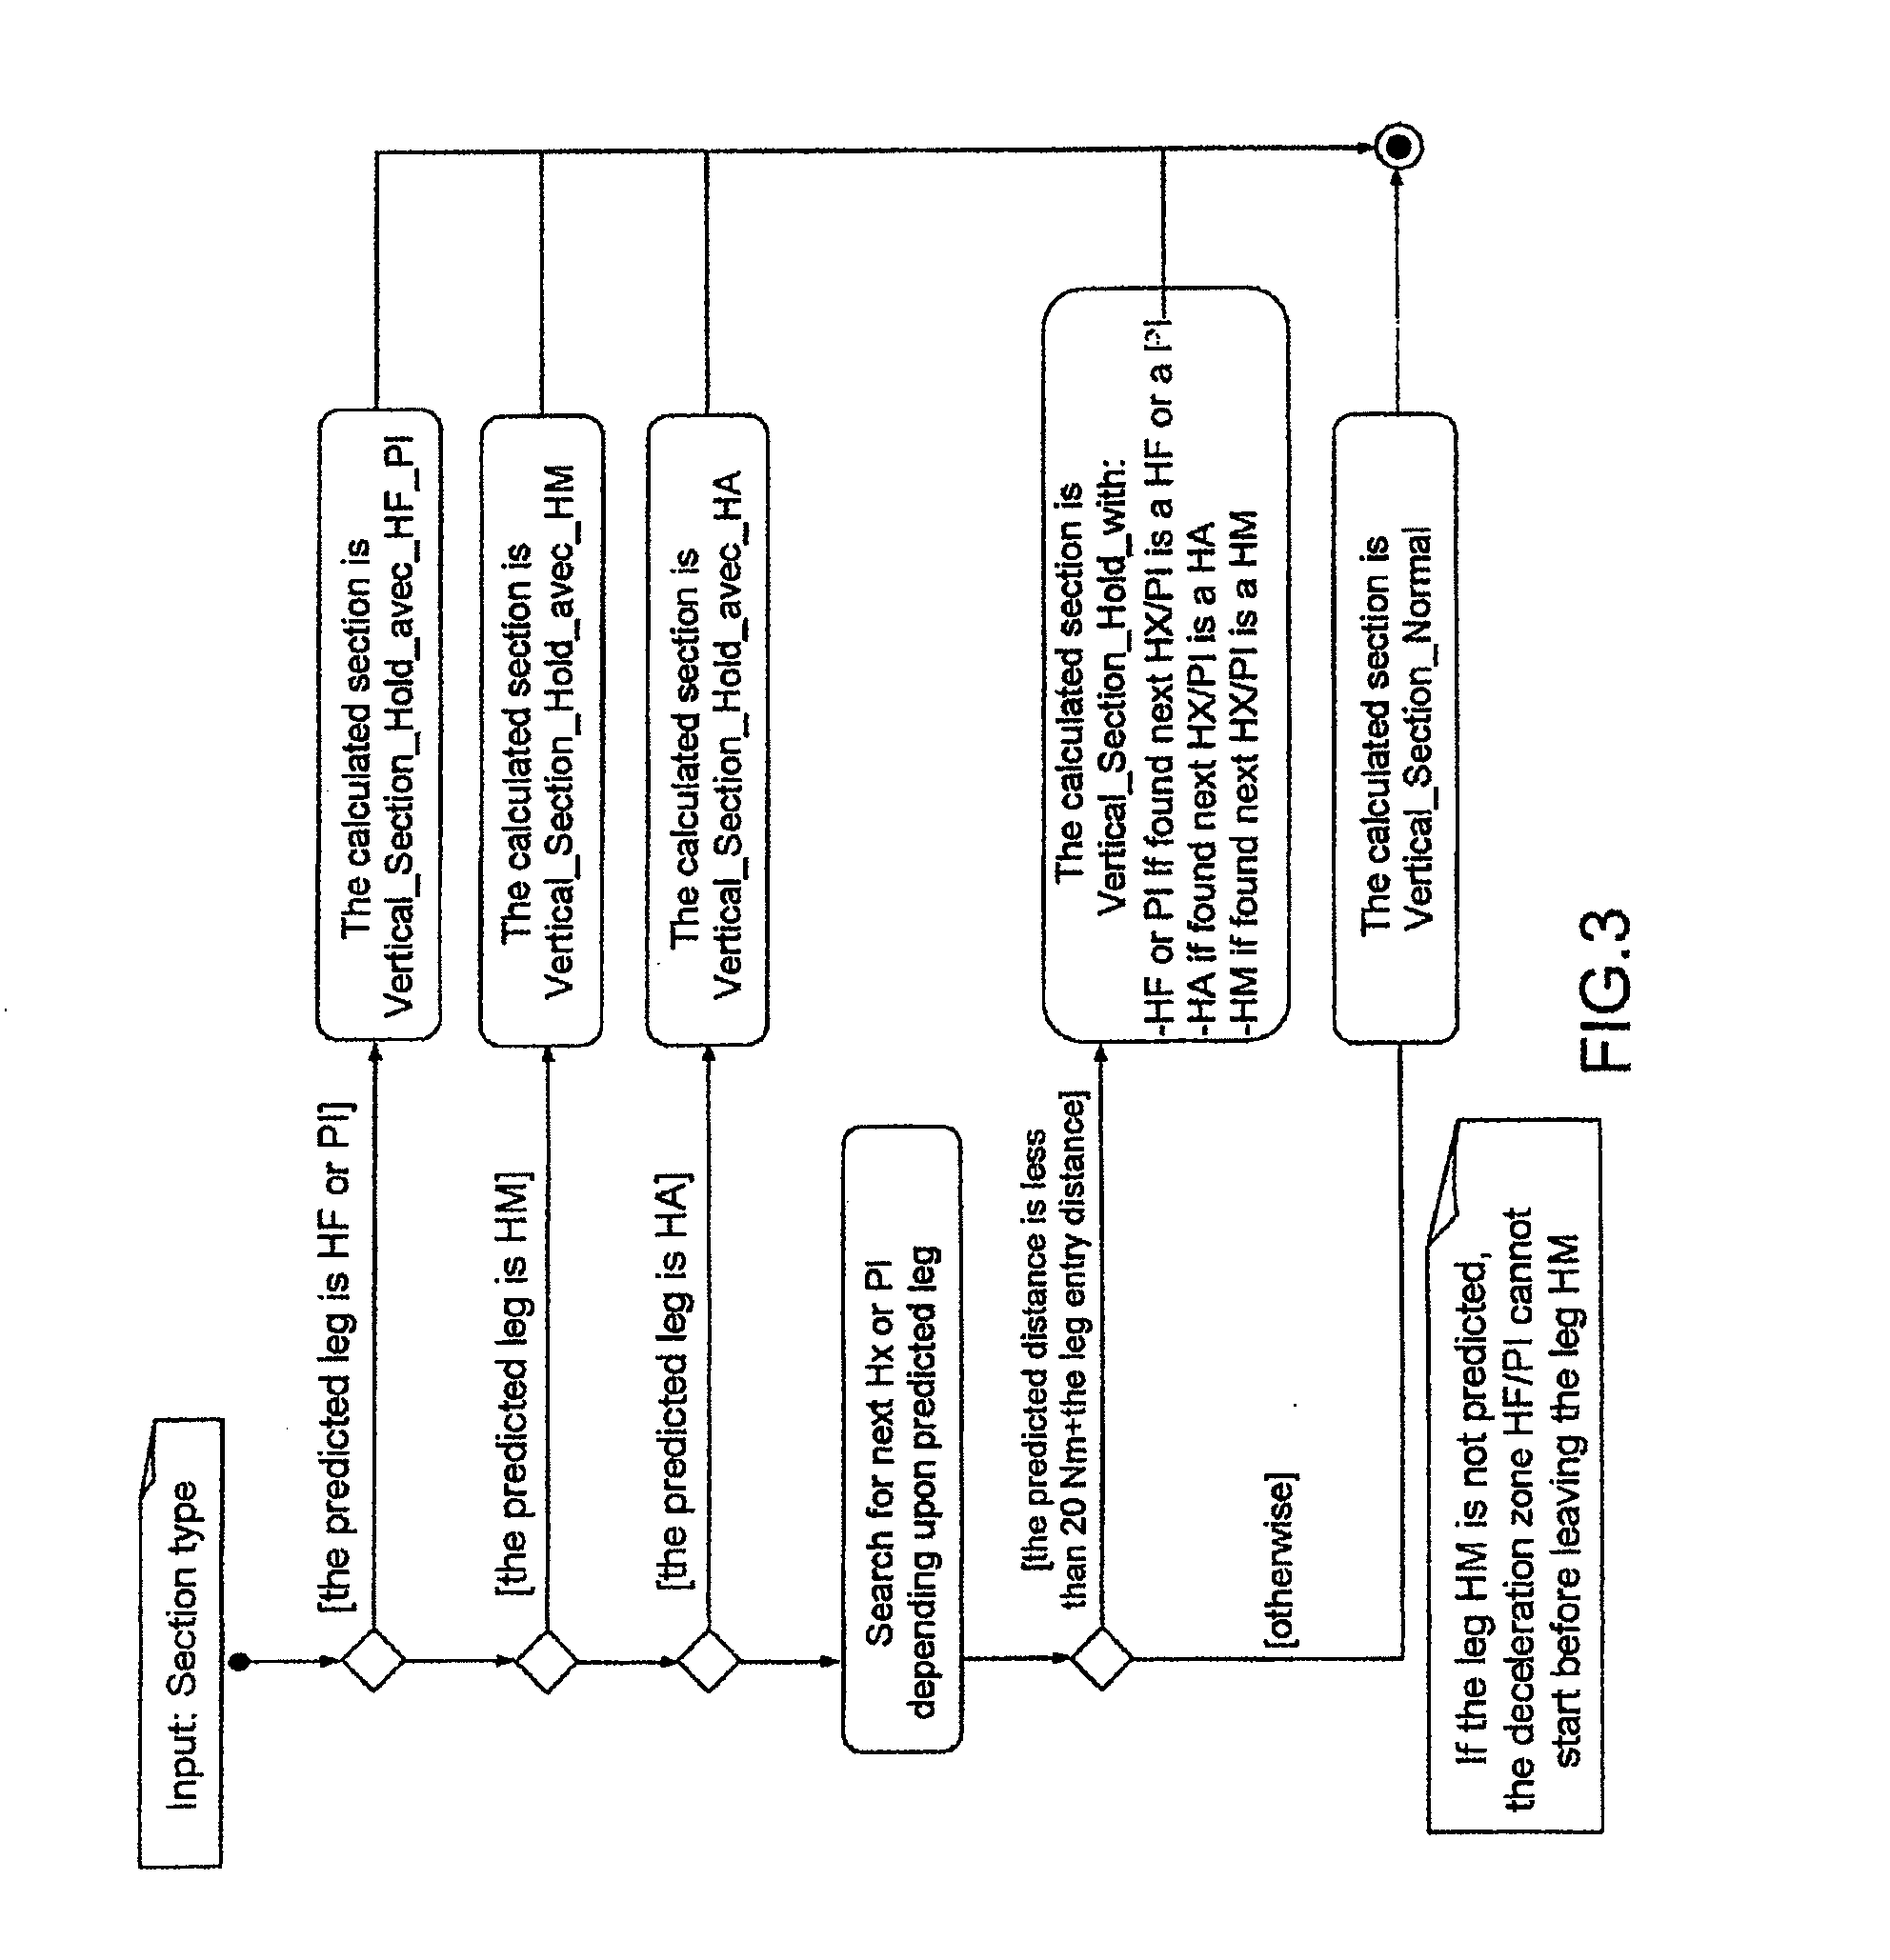 System and Method for Calculating Flight Predictions by Vertical Sections